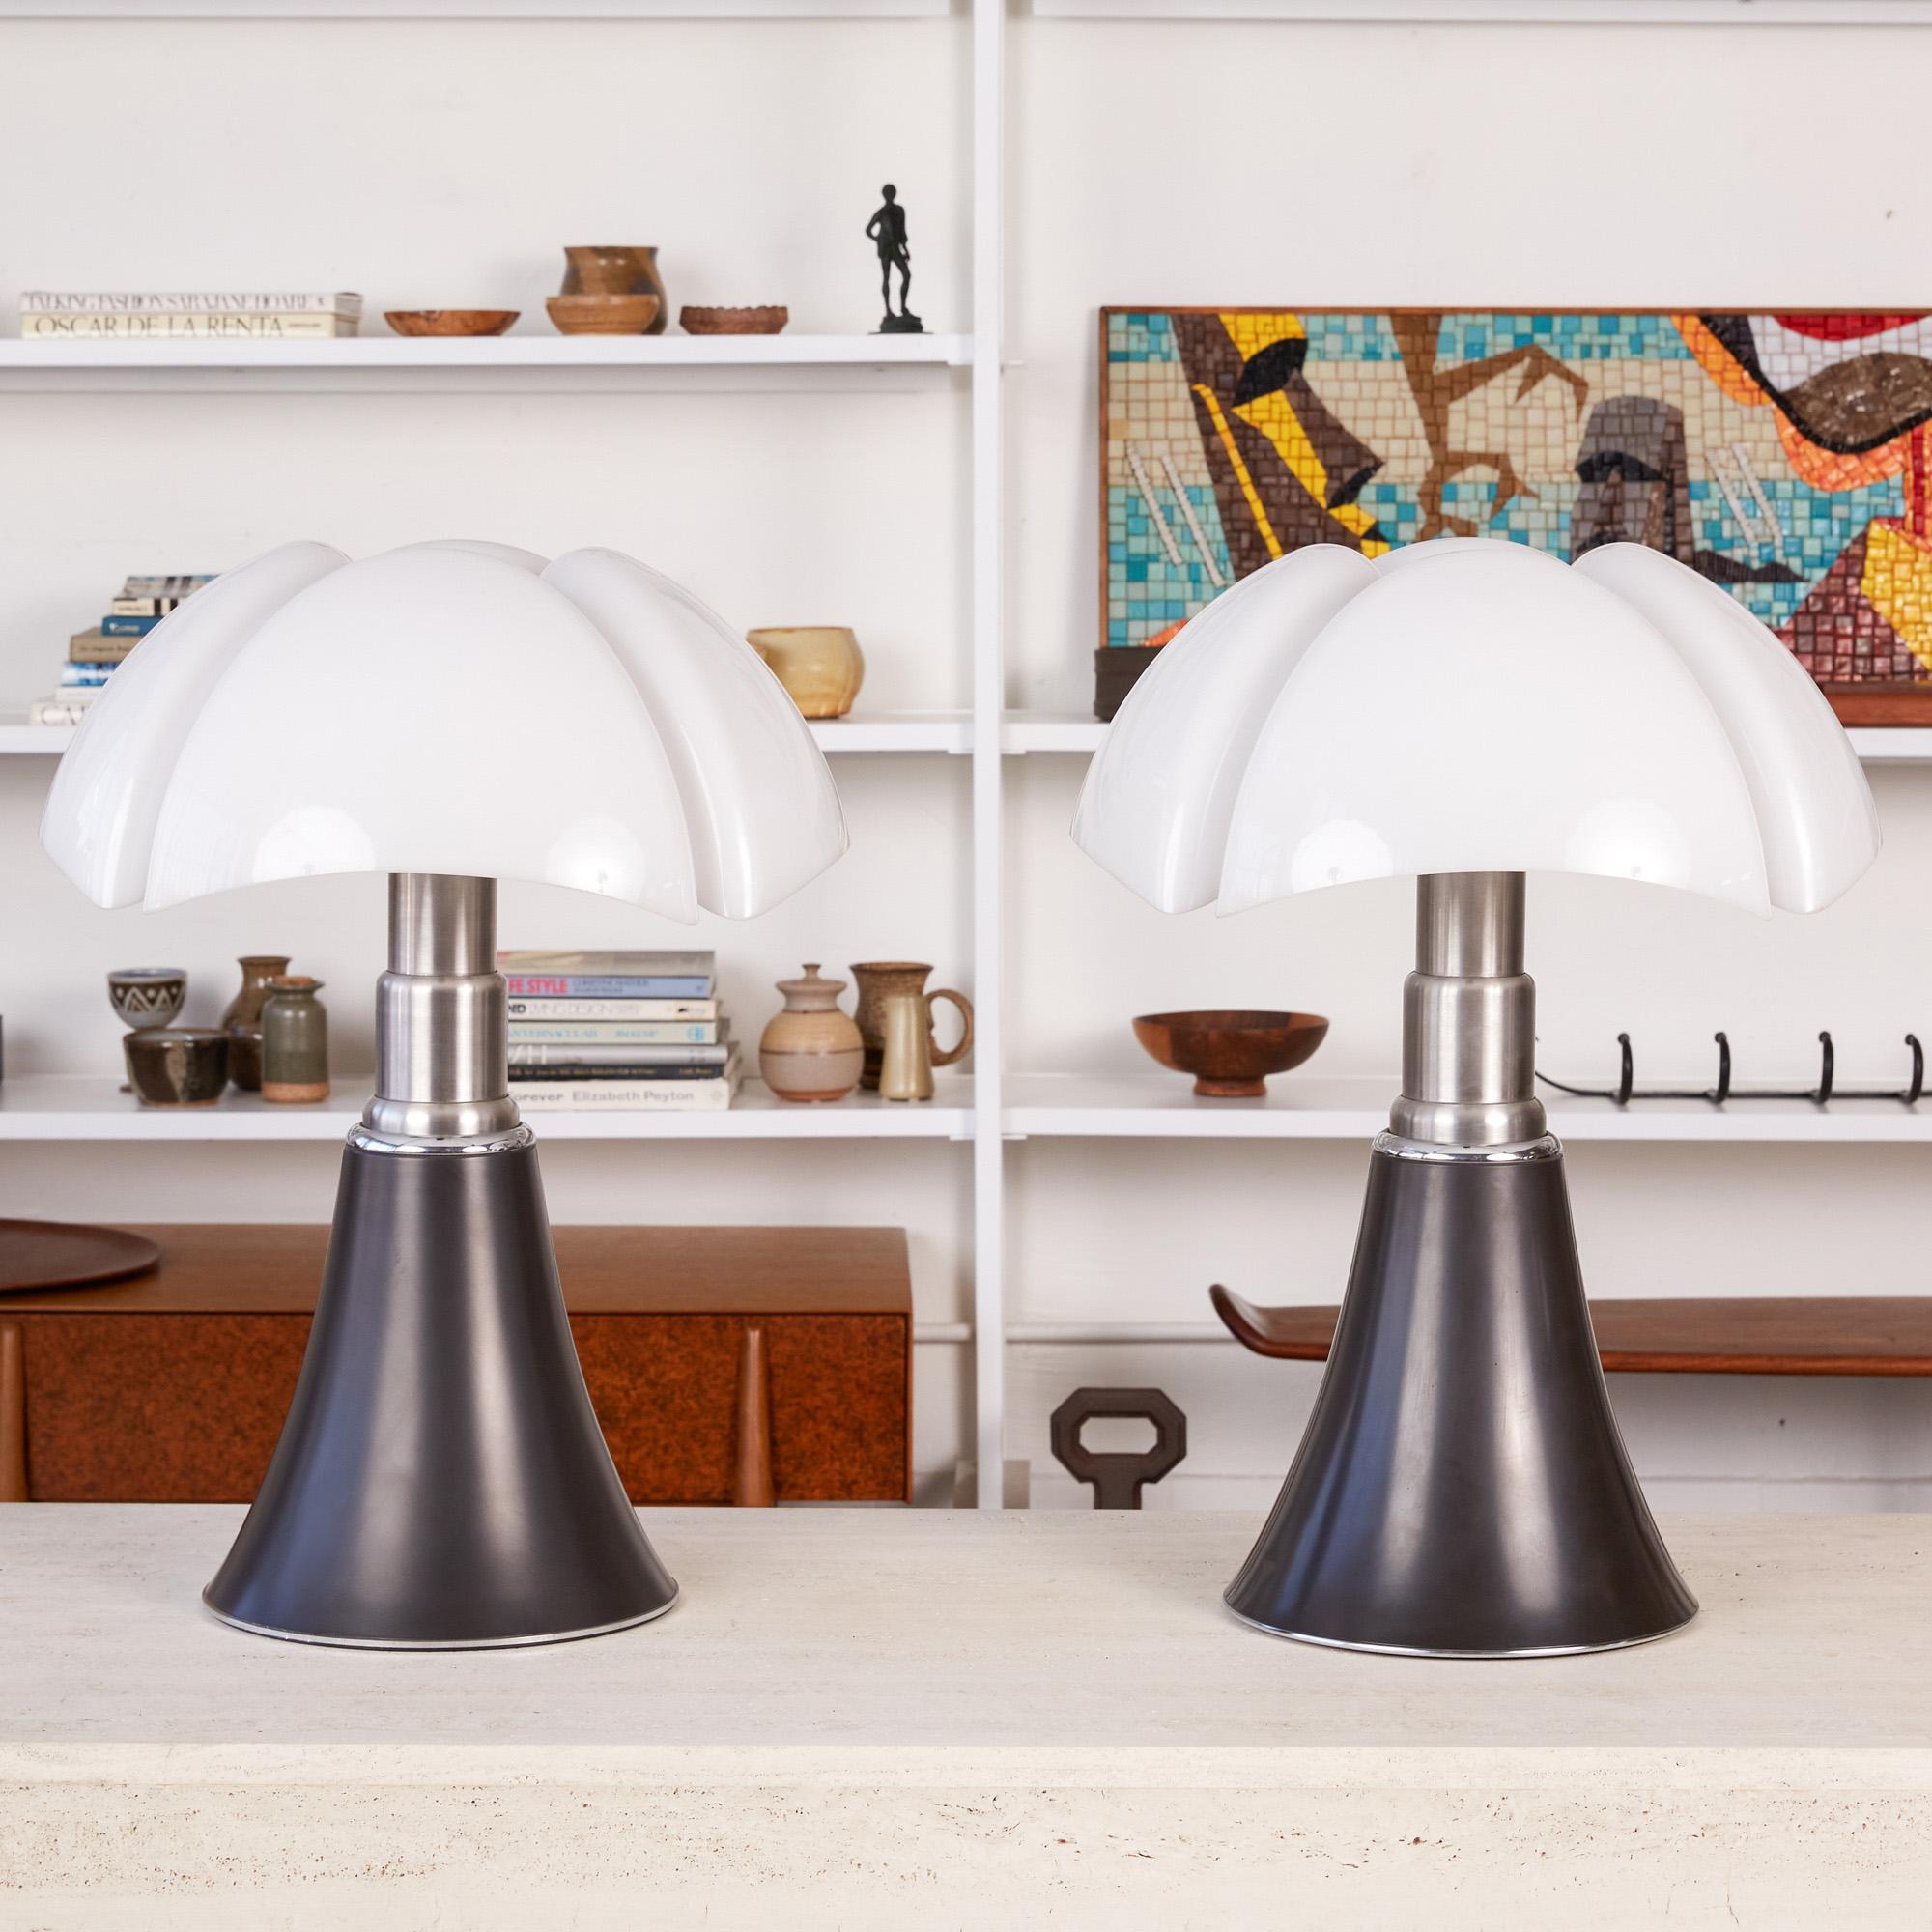 Pipistrello table lamp by Gae Aulenti for Martinelli Luce. The model 620 lamp was designed in 1965 by the Italian design maestro and has remained a steadfast Classic for generations. Each lamp features a sculptural opal plastic shade, black painted